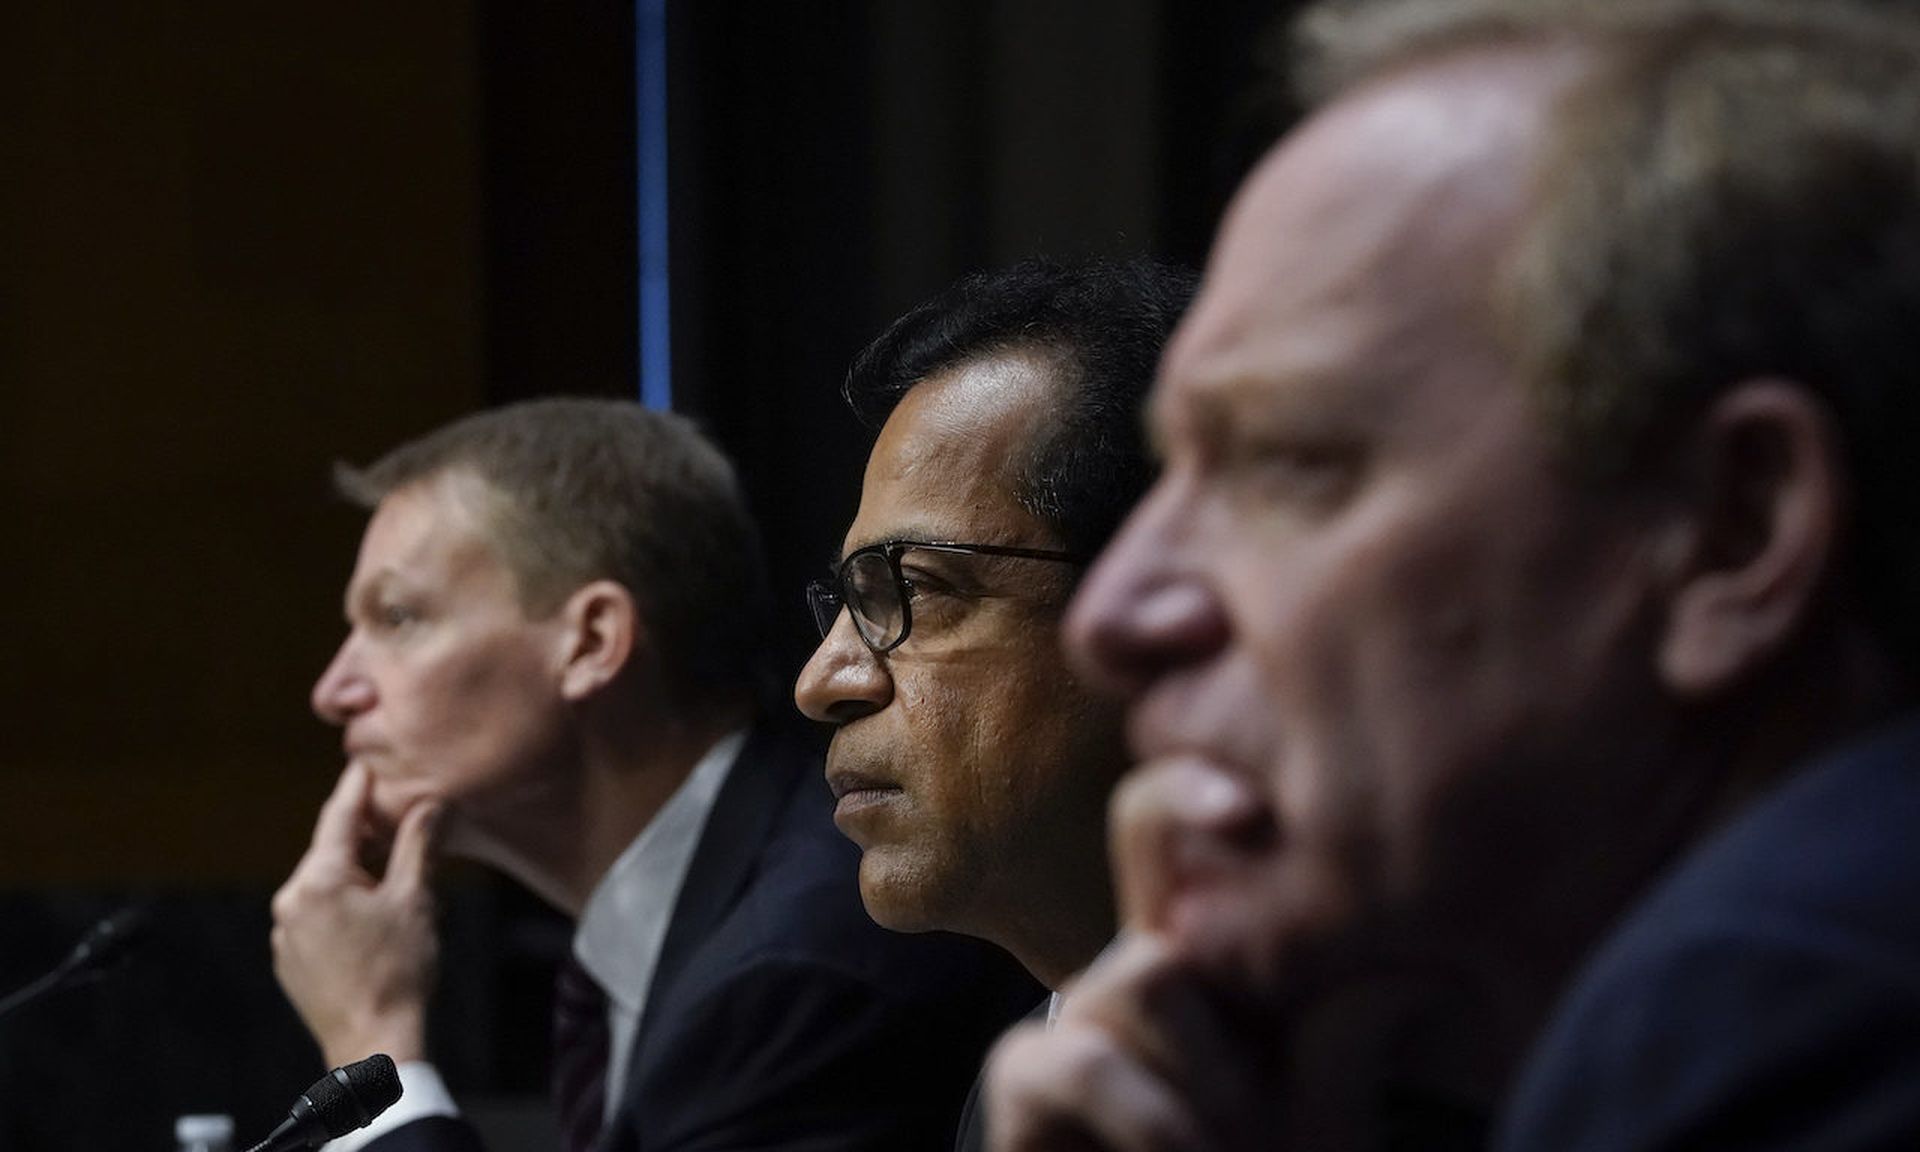 FireEye CEO Kevin Mandia, SolarWinds CEO Sudhakar Ramakrishna and Microsoft President Brad Smith testify during a Senate Intelligence Committee hearing on Capitol Hill on February 23, 2021 in Washington, DC. (Drew Angerer/Getty Images)